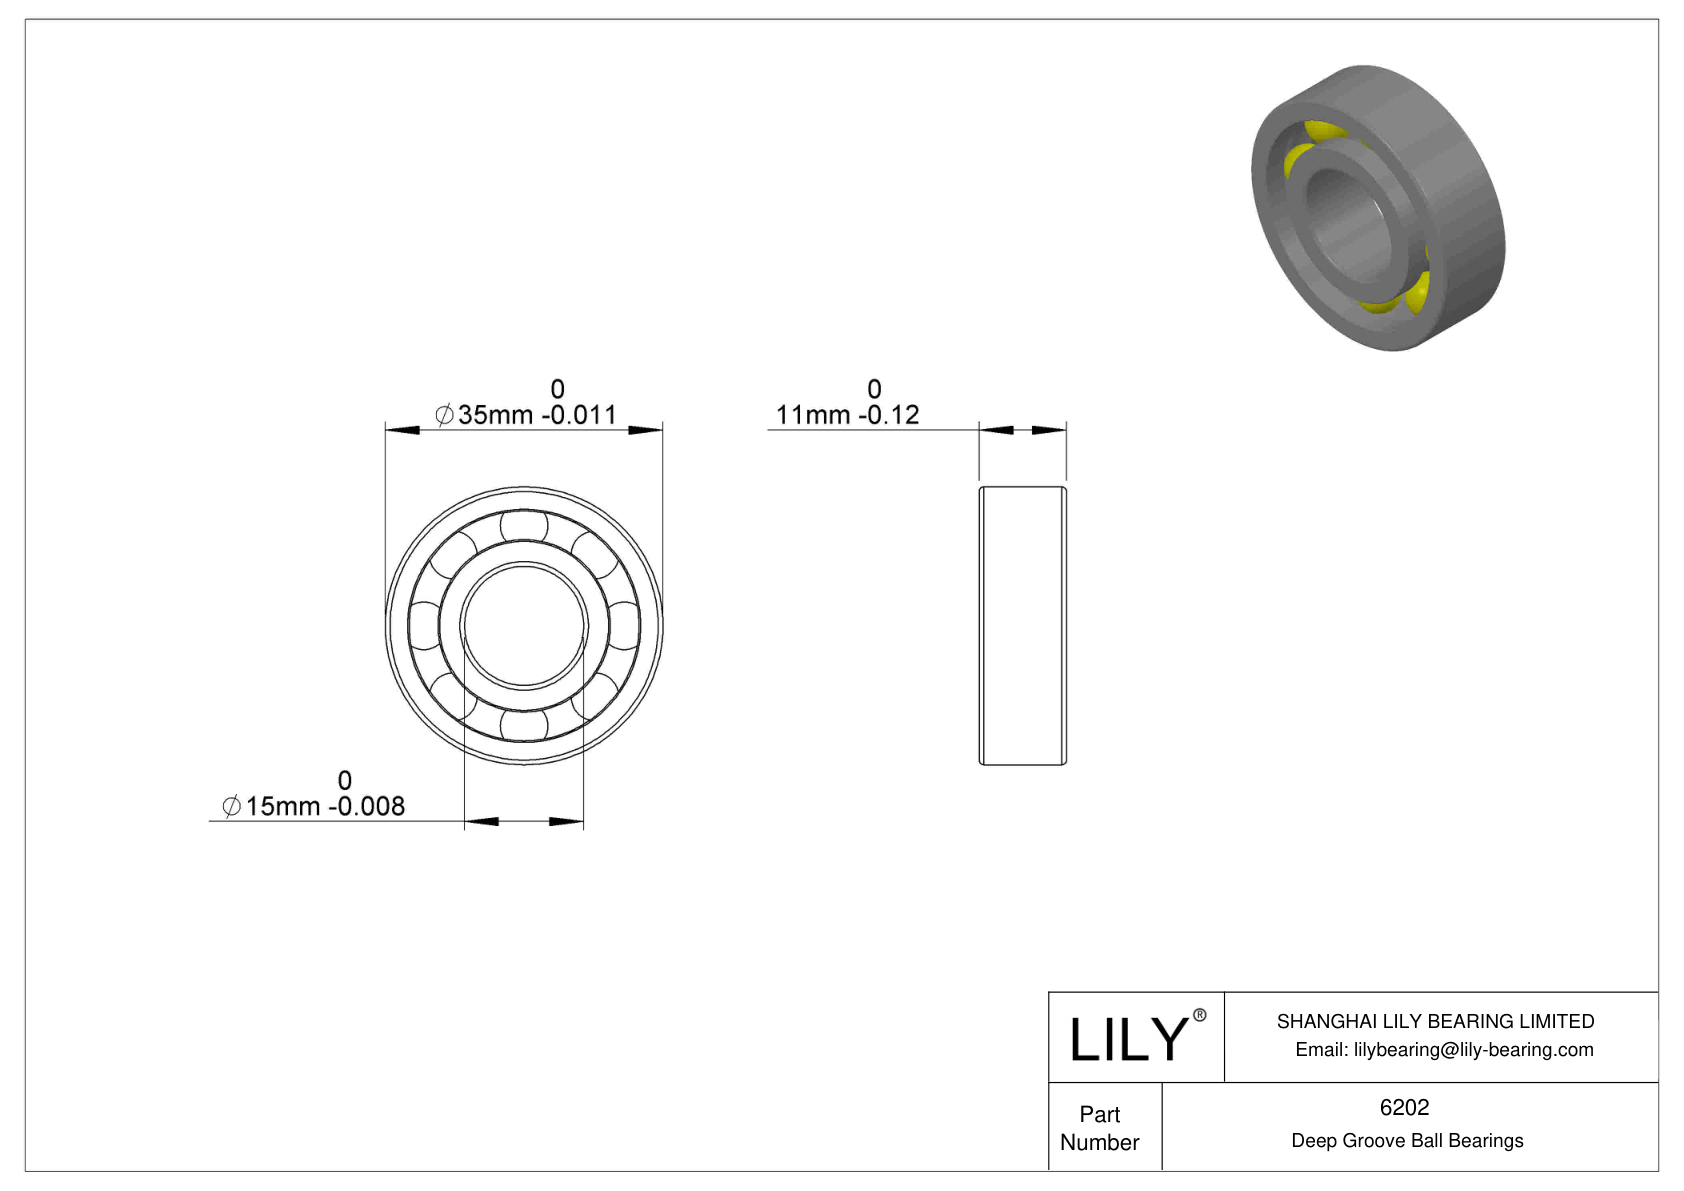 LILY-PU620150-20C5L12M10 Polyurethane Coated Bearing With Screw cad drawing